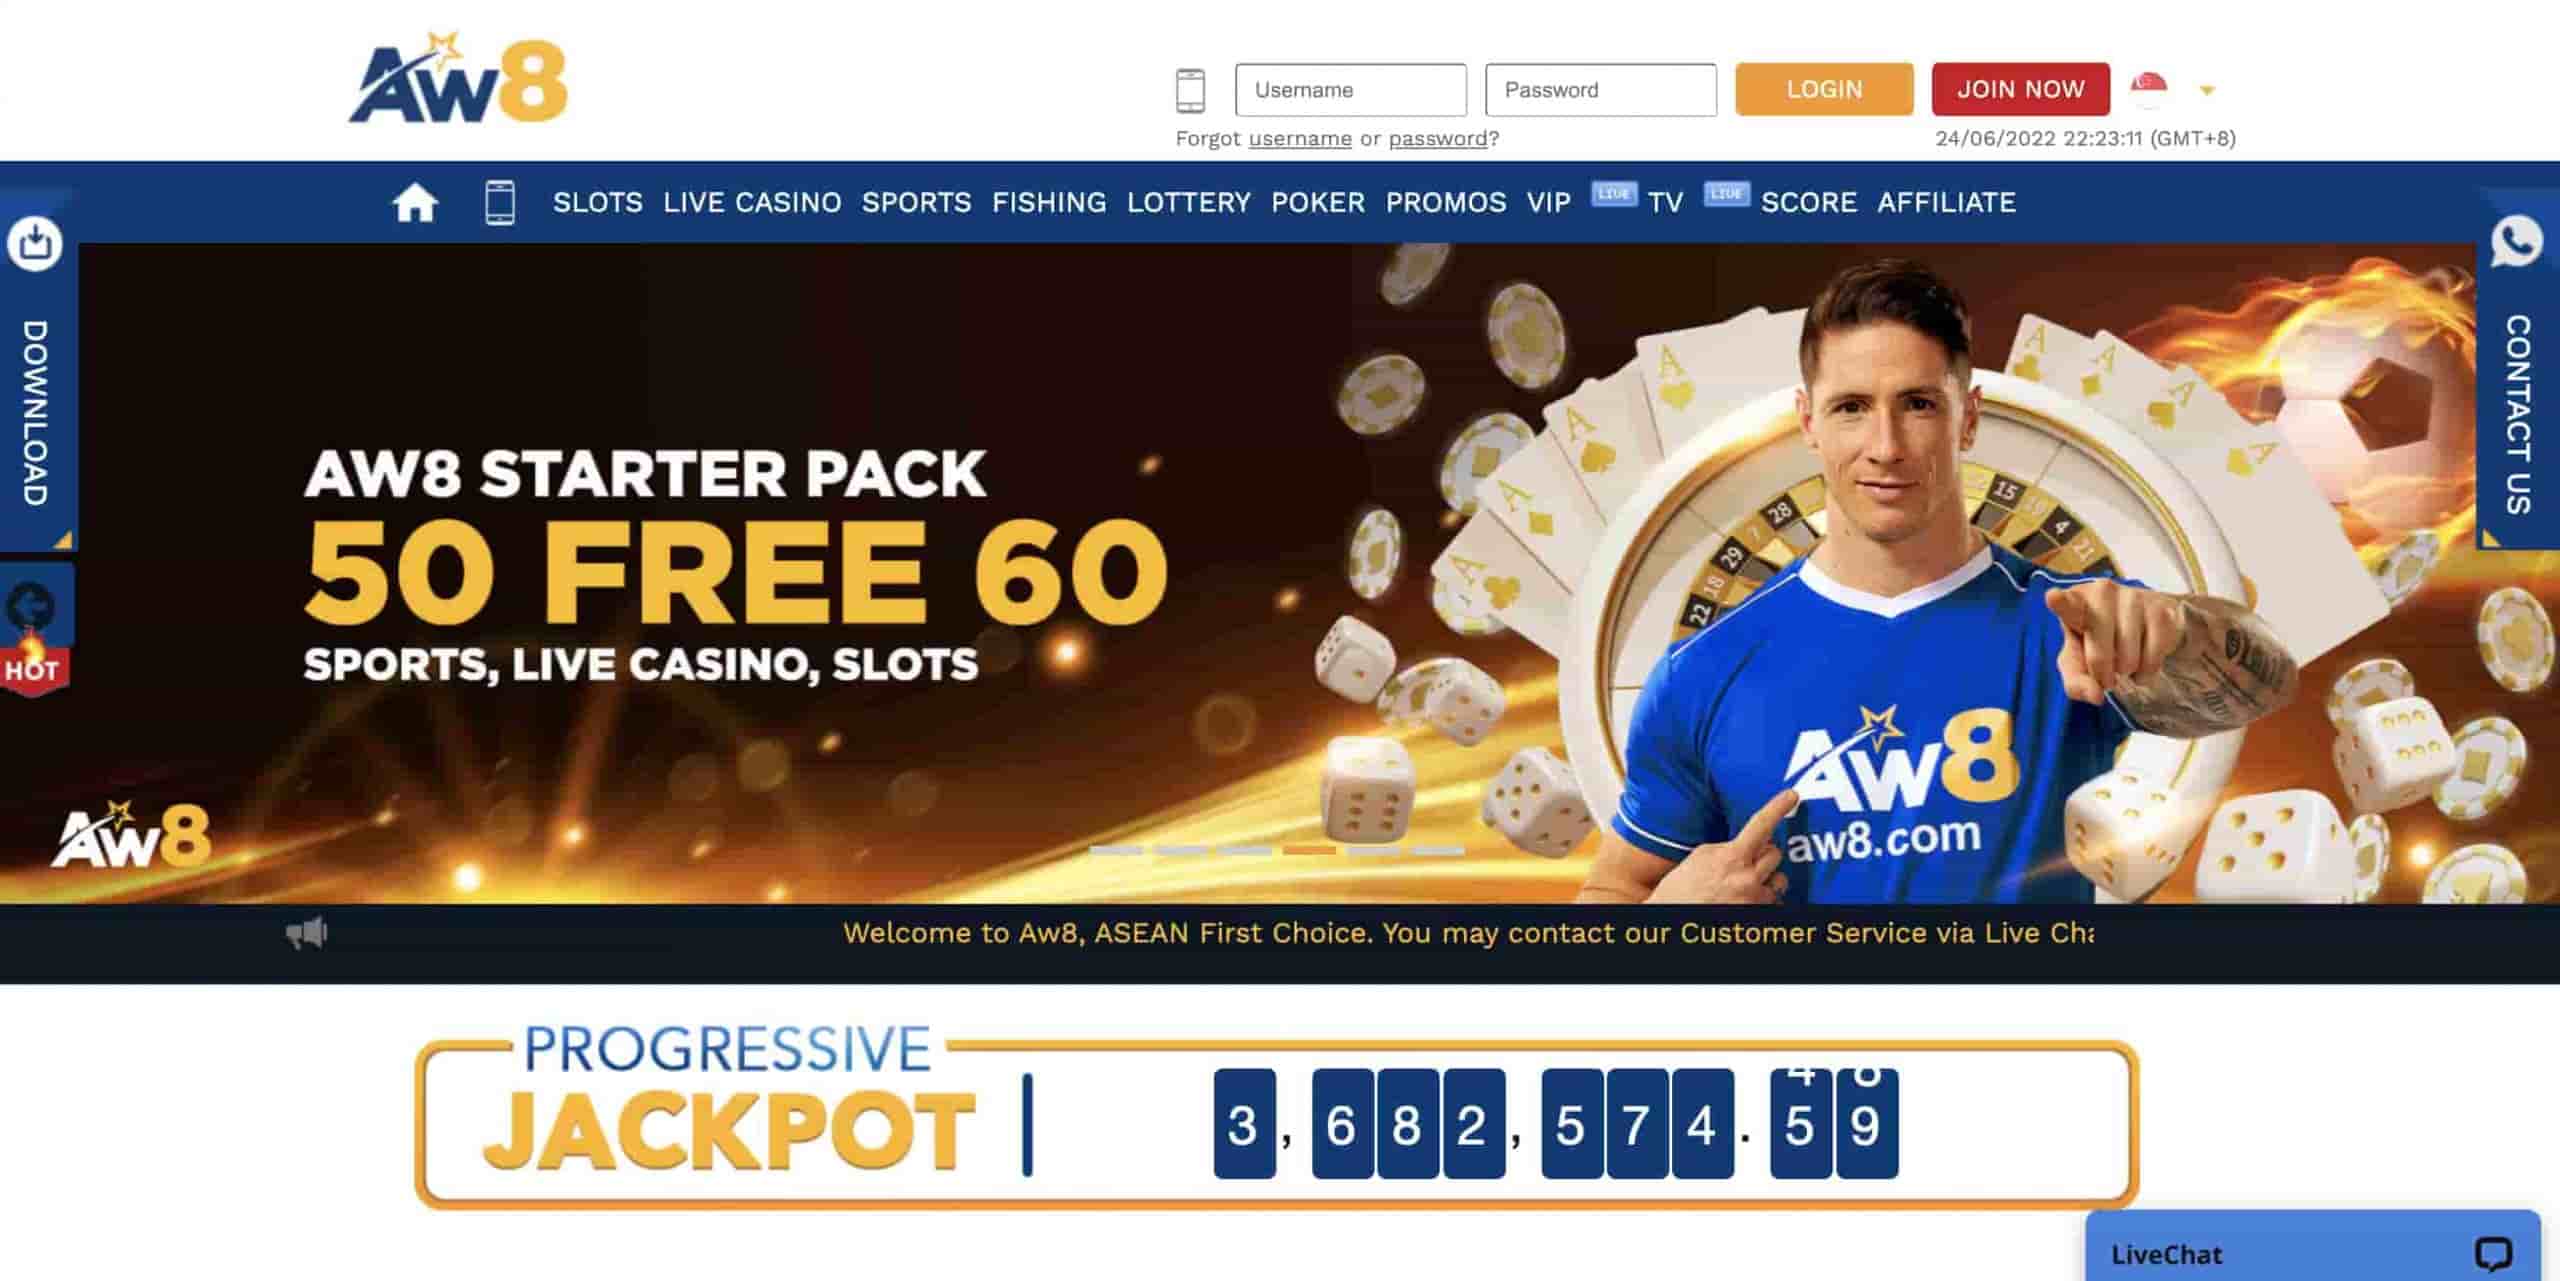 asian bookies, asian bookmakers, online betting malaysia, asian betting sites, best asian bookmakers, asian sports bookmakers, sports betting malaysia, online sports betting malaysia, singapore online sportsbook Once, asian bookies, asian bookmakers, online betting malaysia, asian betting sites, best asian bookmakers, asian sports bookmakers, sports betting malaysia, online sports betting malaysia, singapore online sportsbook Twice: 3 Reasons Why You Shouldn't asian bookies, asian bookmakers, online betting malaysia, asian betting sites, best asian bookmakers, asian sports bookmakers, sports betting malaysia, online sports betting malaysia, singapore online sportsbook The Third Time